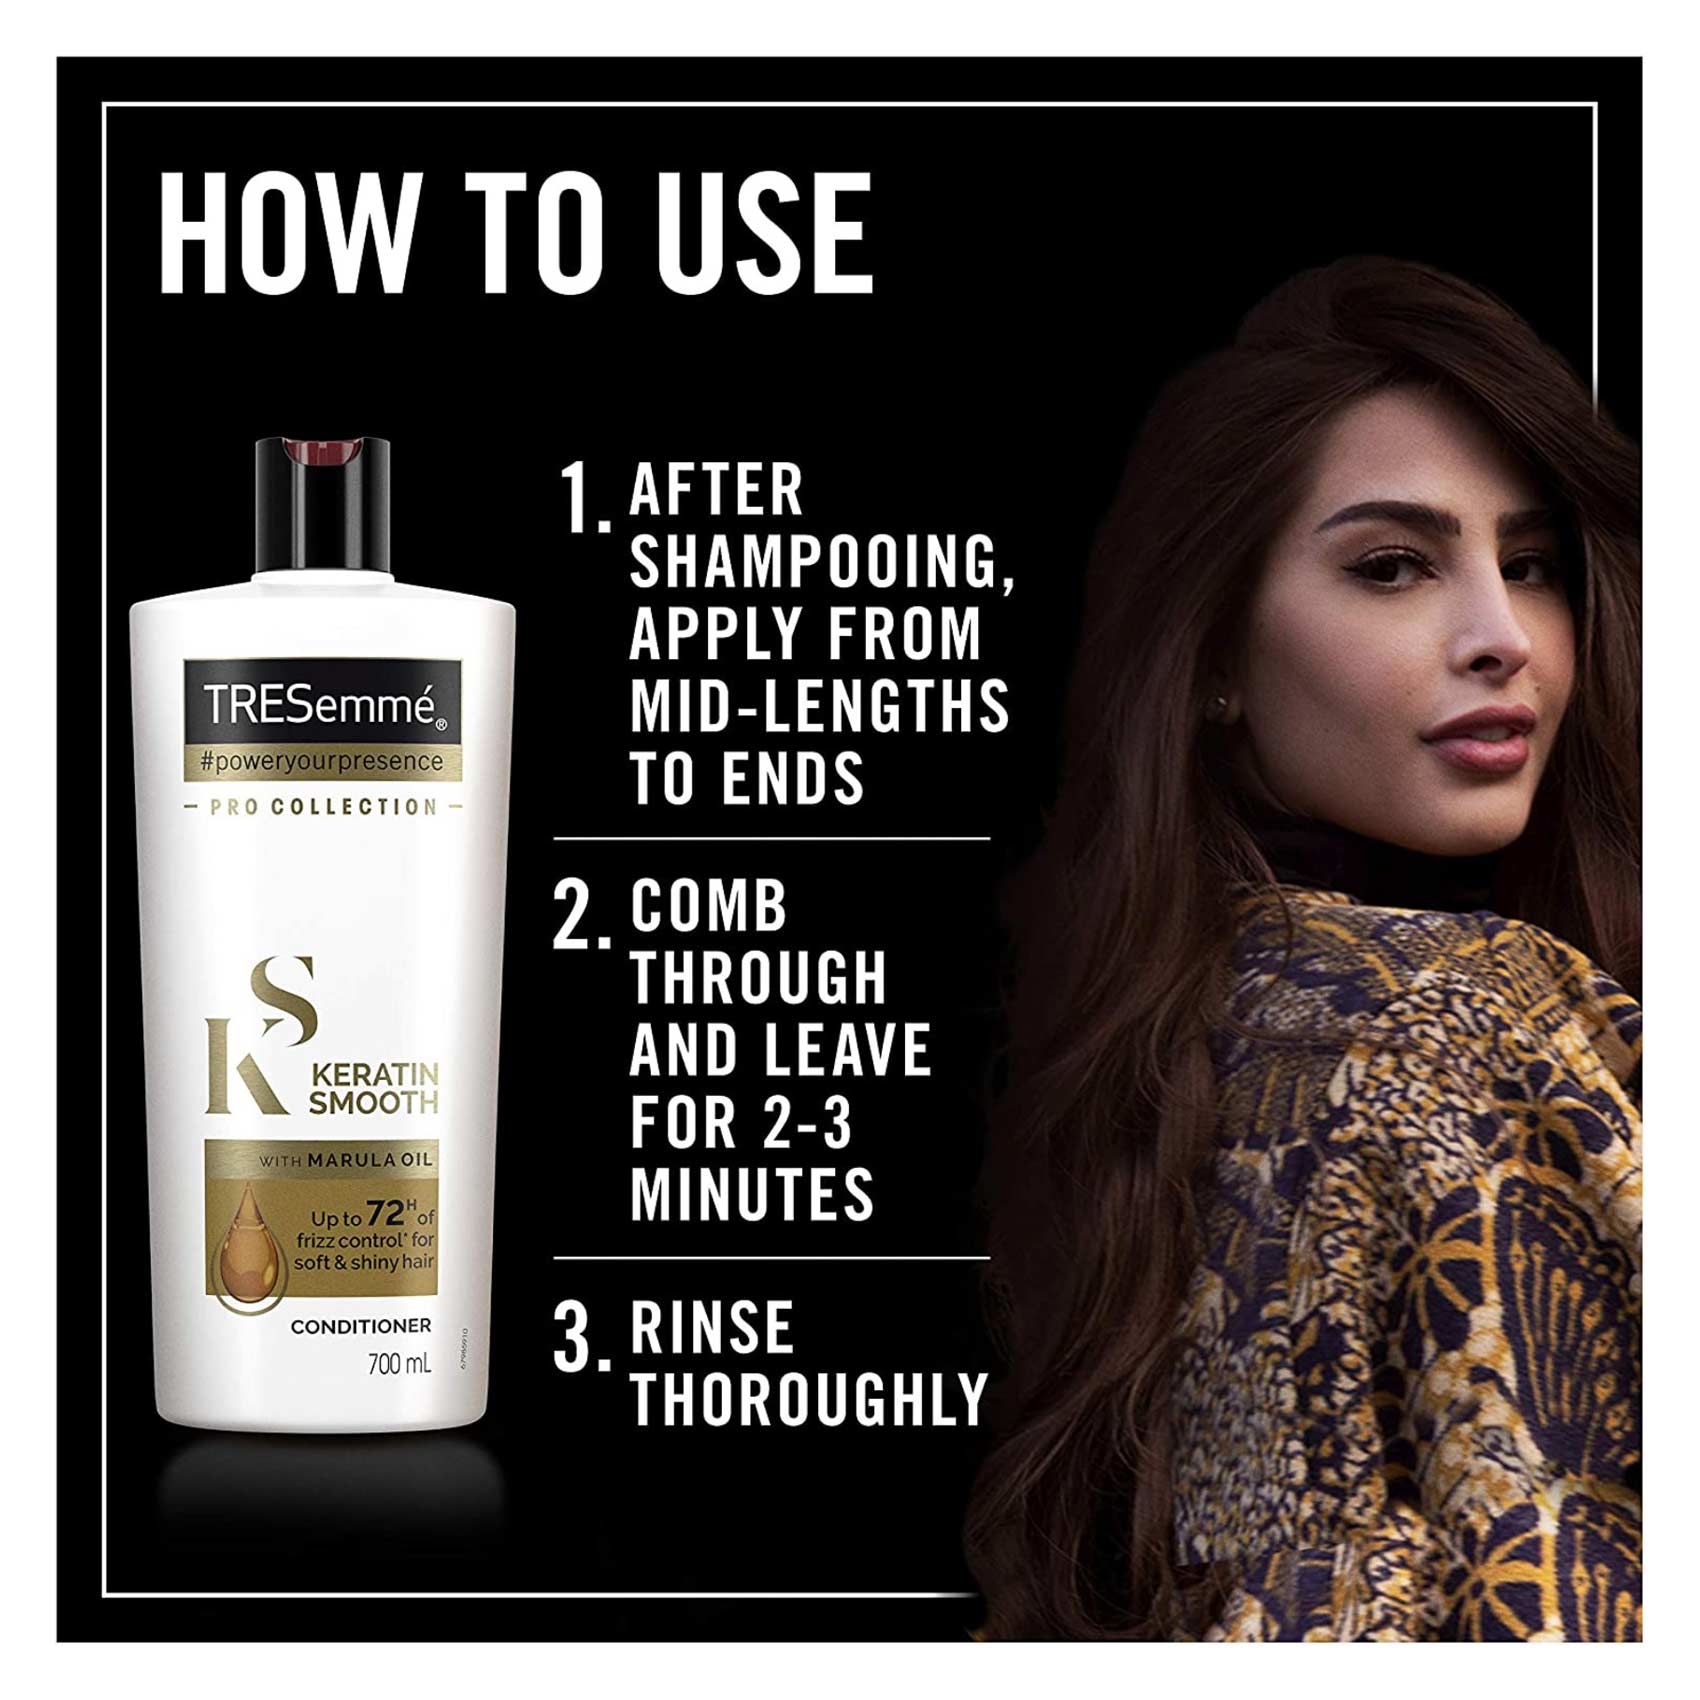 Tresemme Keratin Smooth Hair Conditioner 700ml